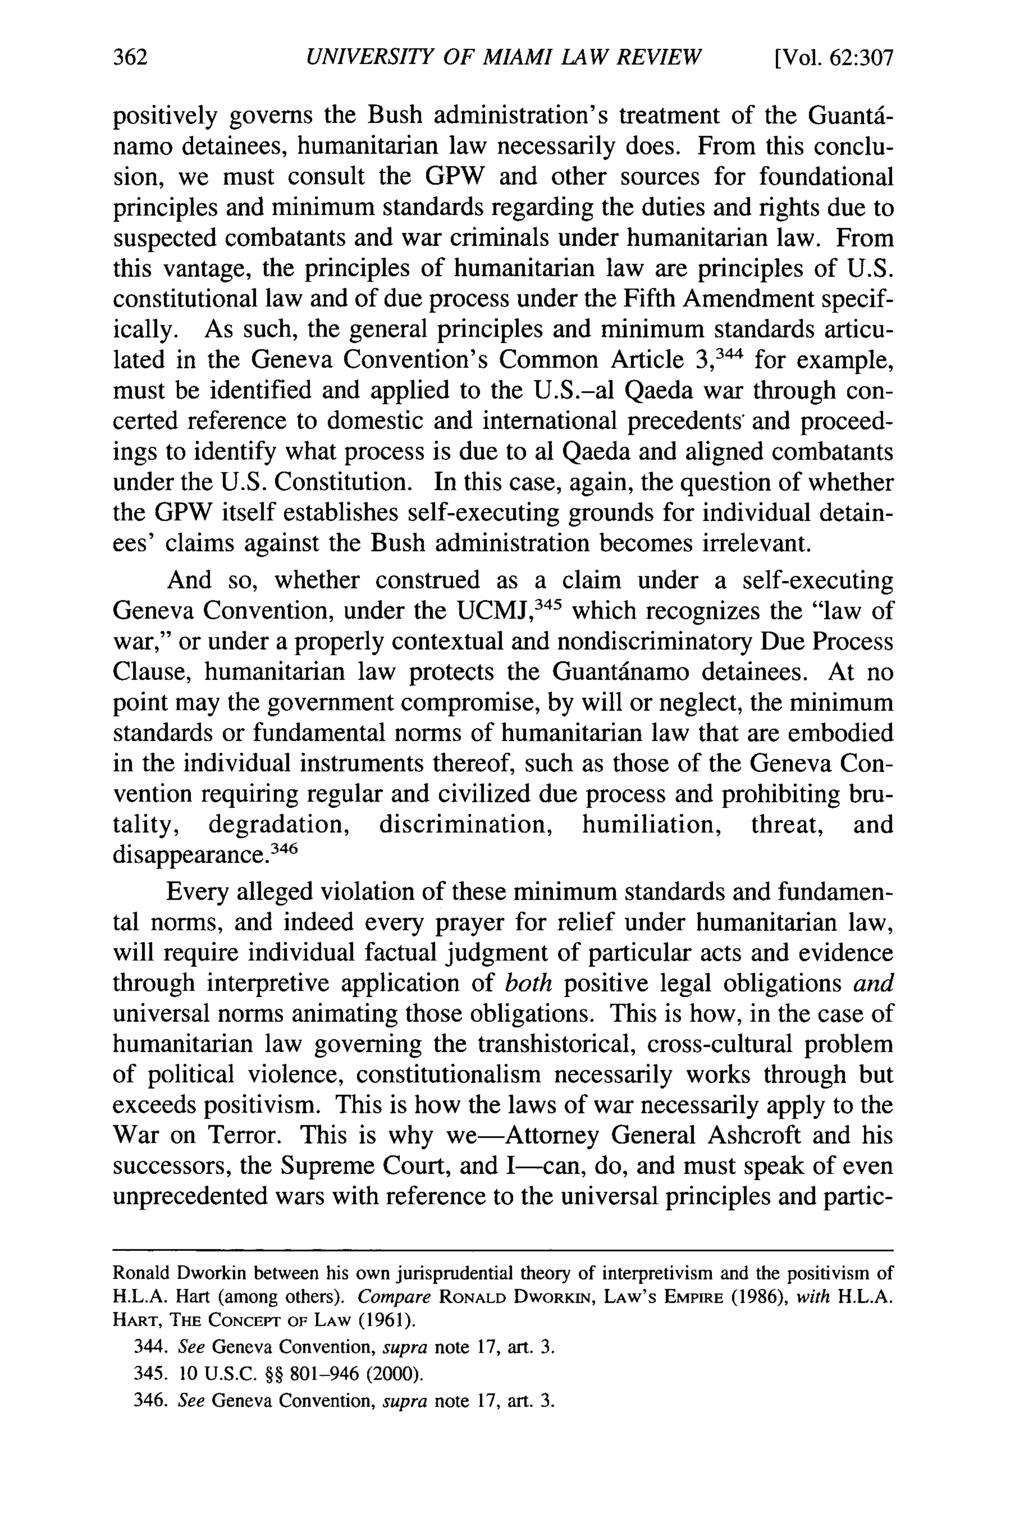 UNIVERSITY OF MIAMI LAW REVIEW [Vol. 62:307 positively governs the Bush administration's treatment of the Guantinamo detainees, humanitarian law necessarily does.